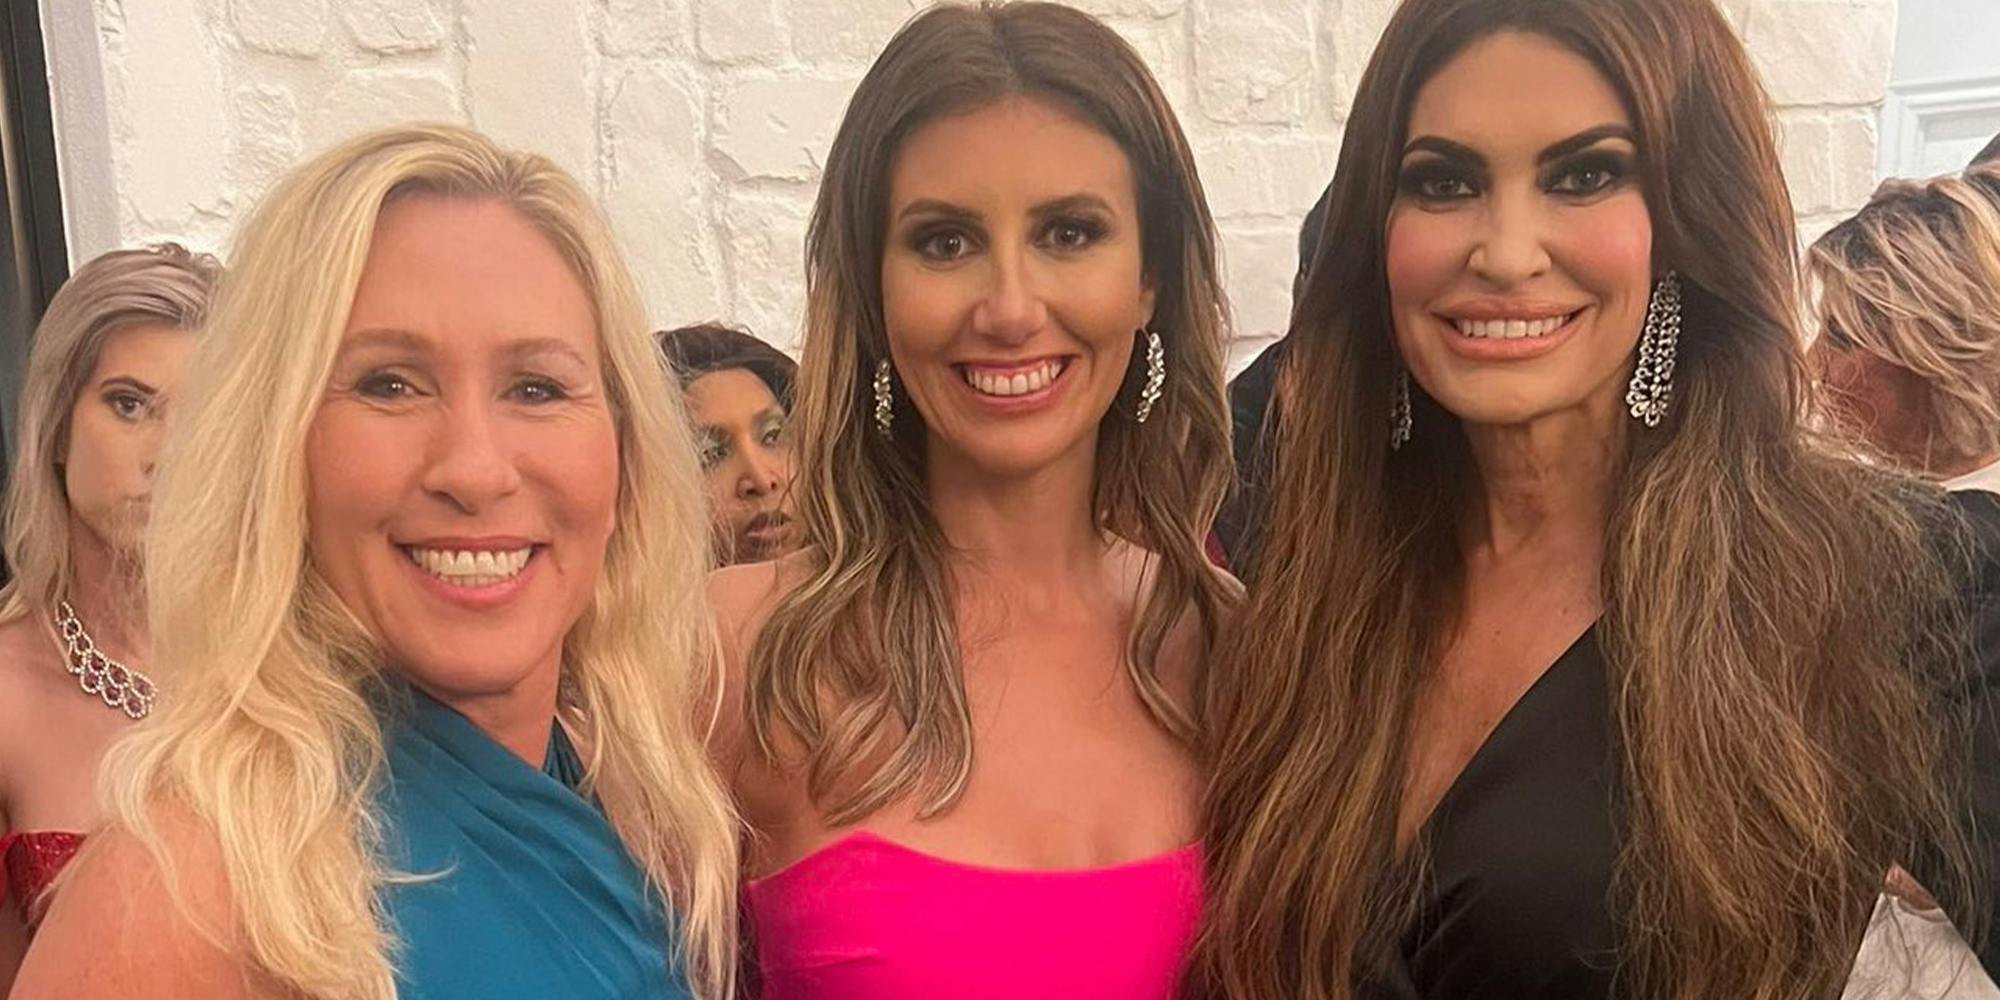 'New Moms for Liberty recruitment poster': Marjorie Taylor Greene, Kimberly Guilfoyle, Alina Habba photo at Mar-a-Lago party gets memed